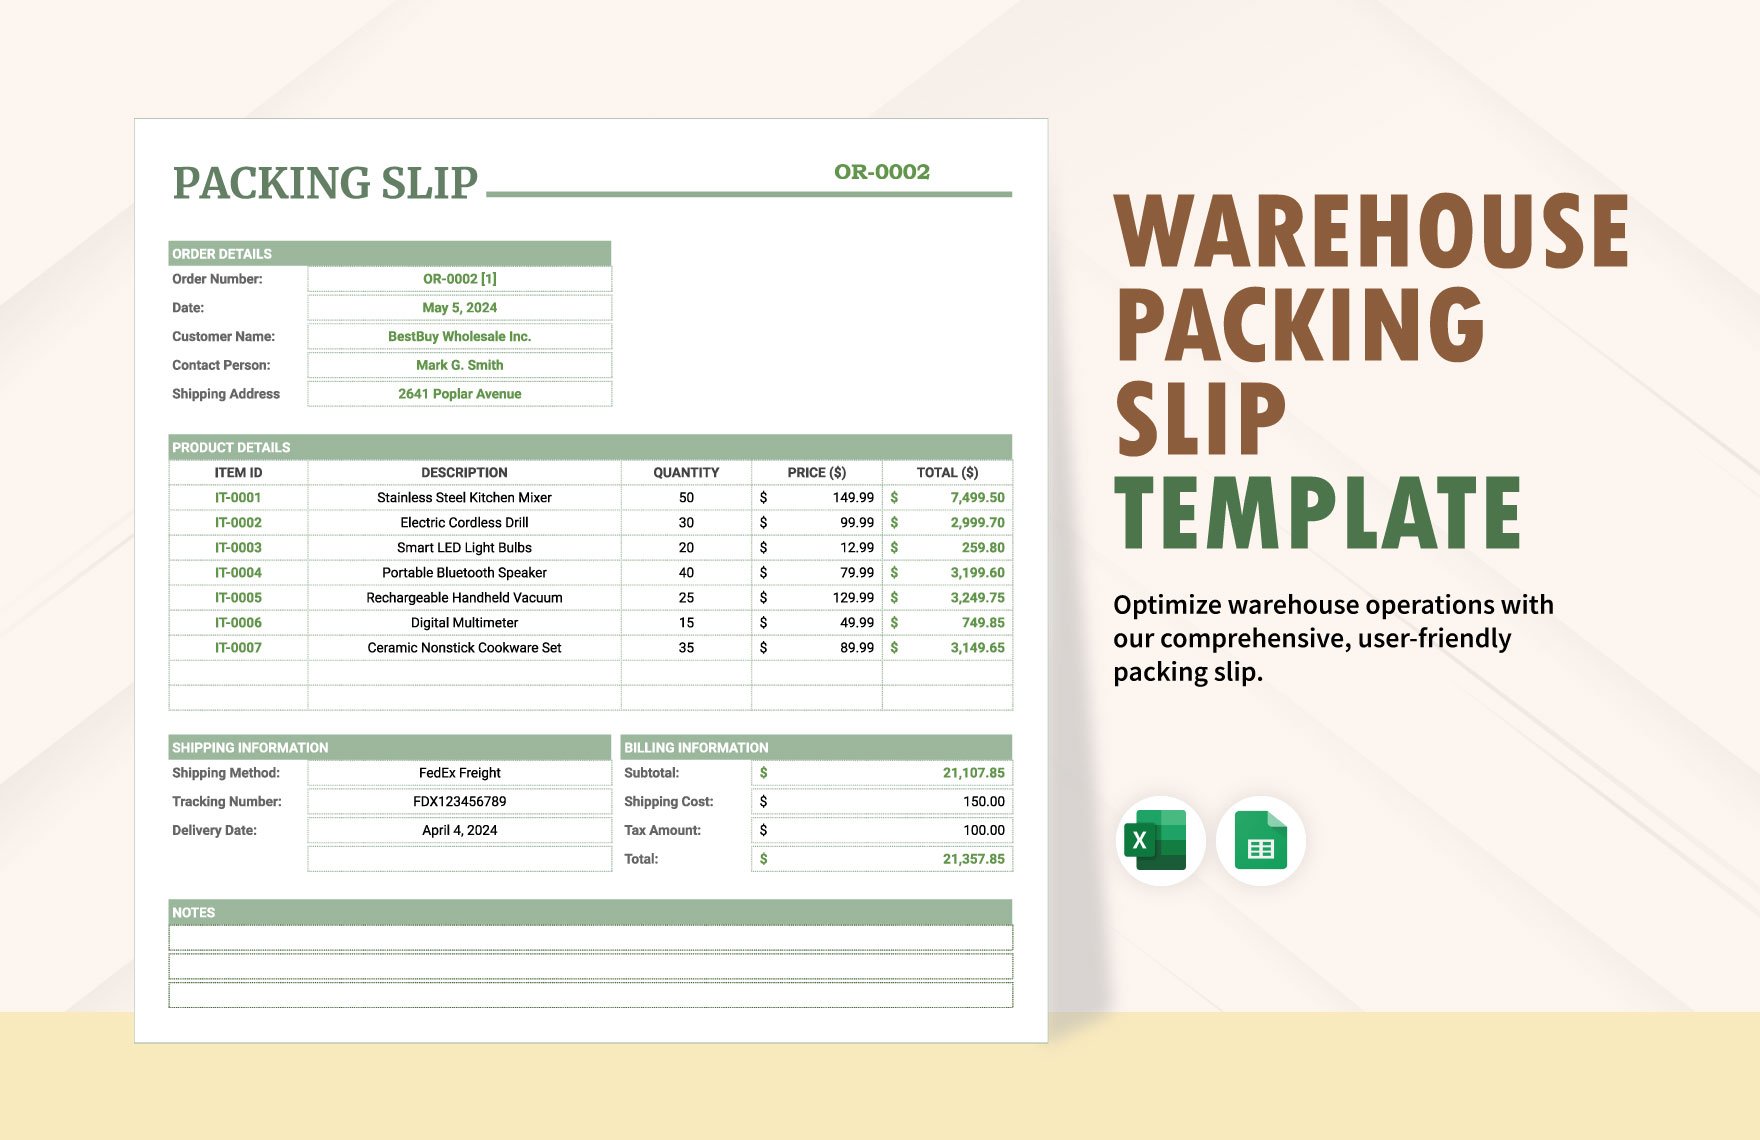 Warehouse Packing Slip Template in Excel, Google Sheets